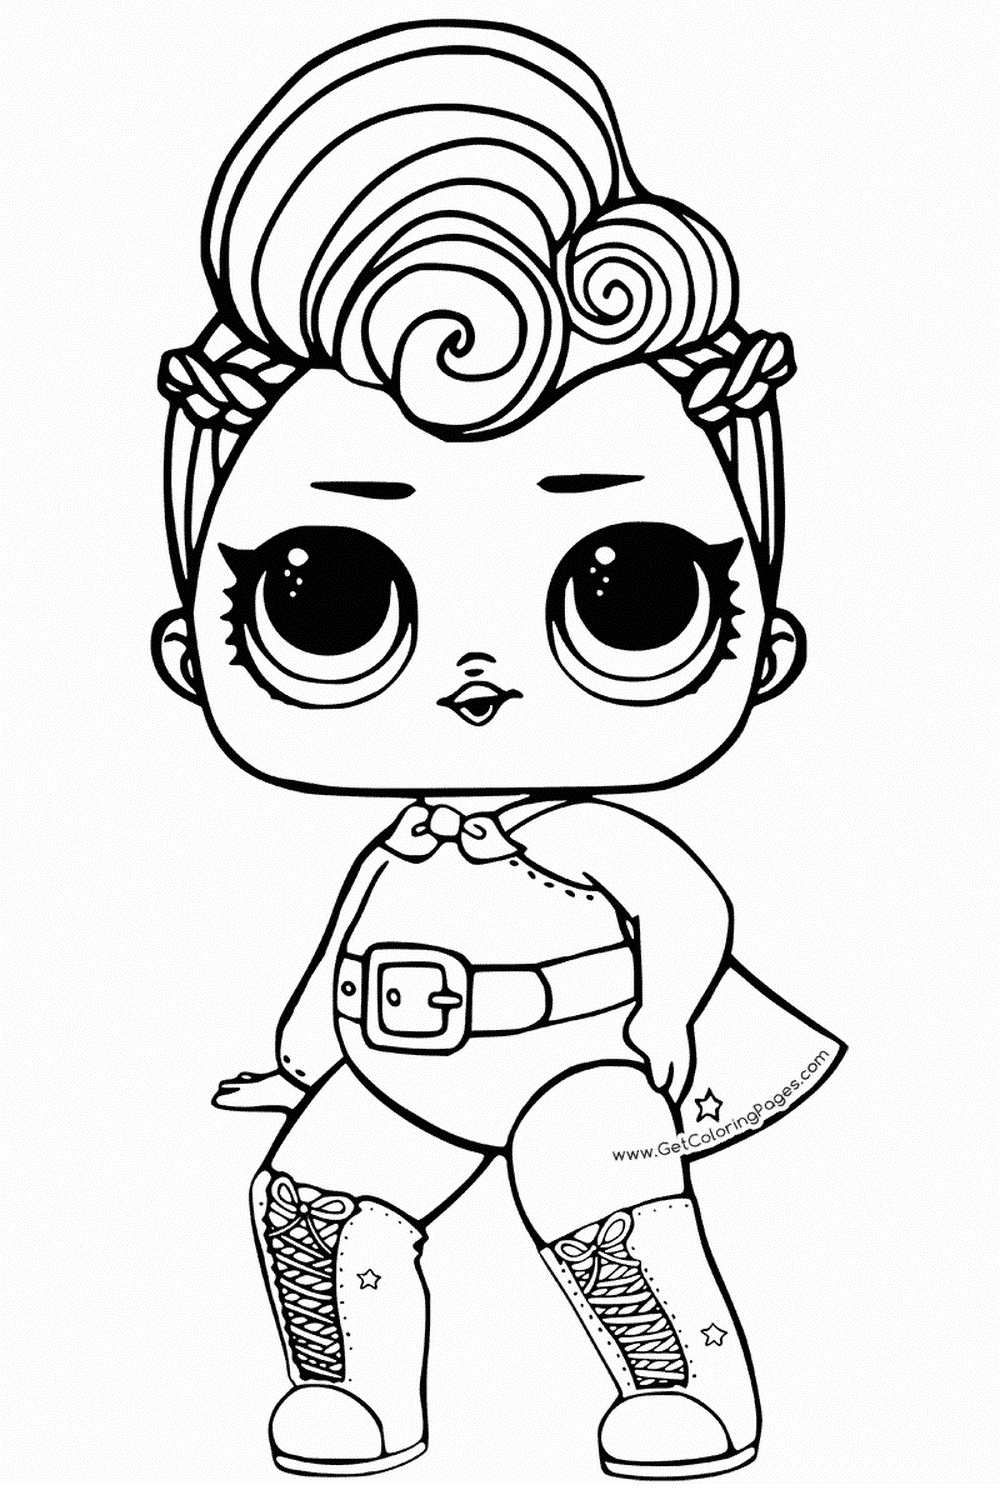 LOL Surprise Dolls Coloring Pages. Print Them for Free All the Series